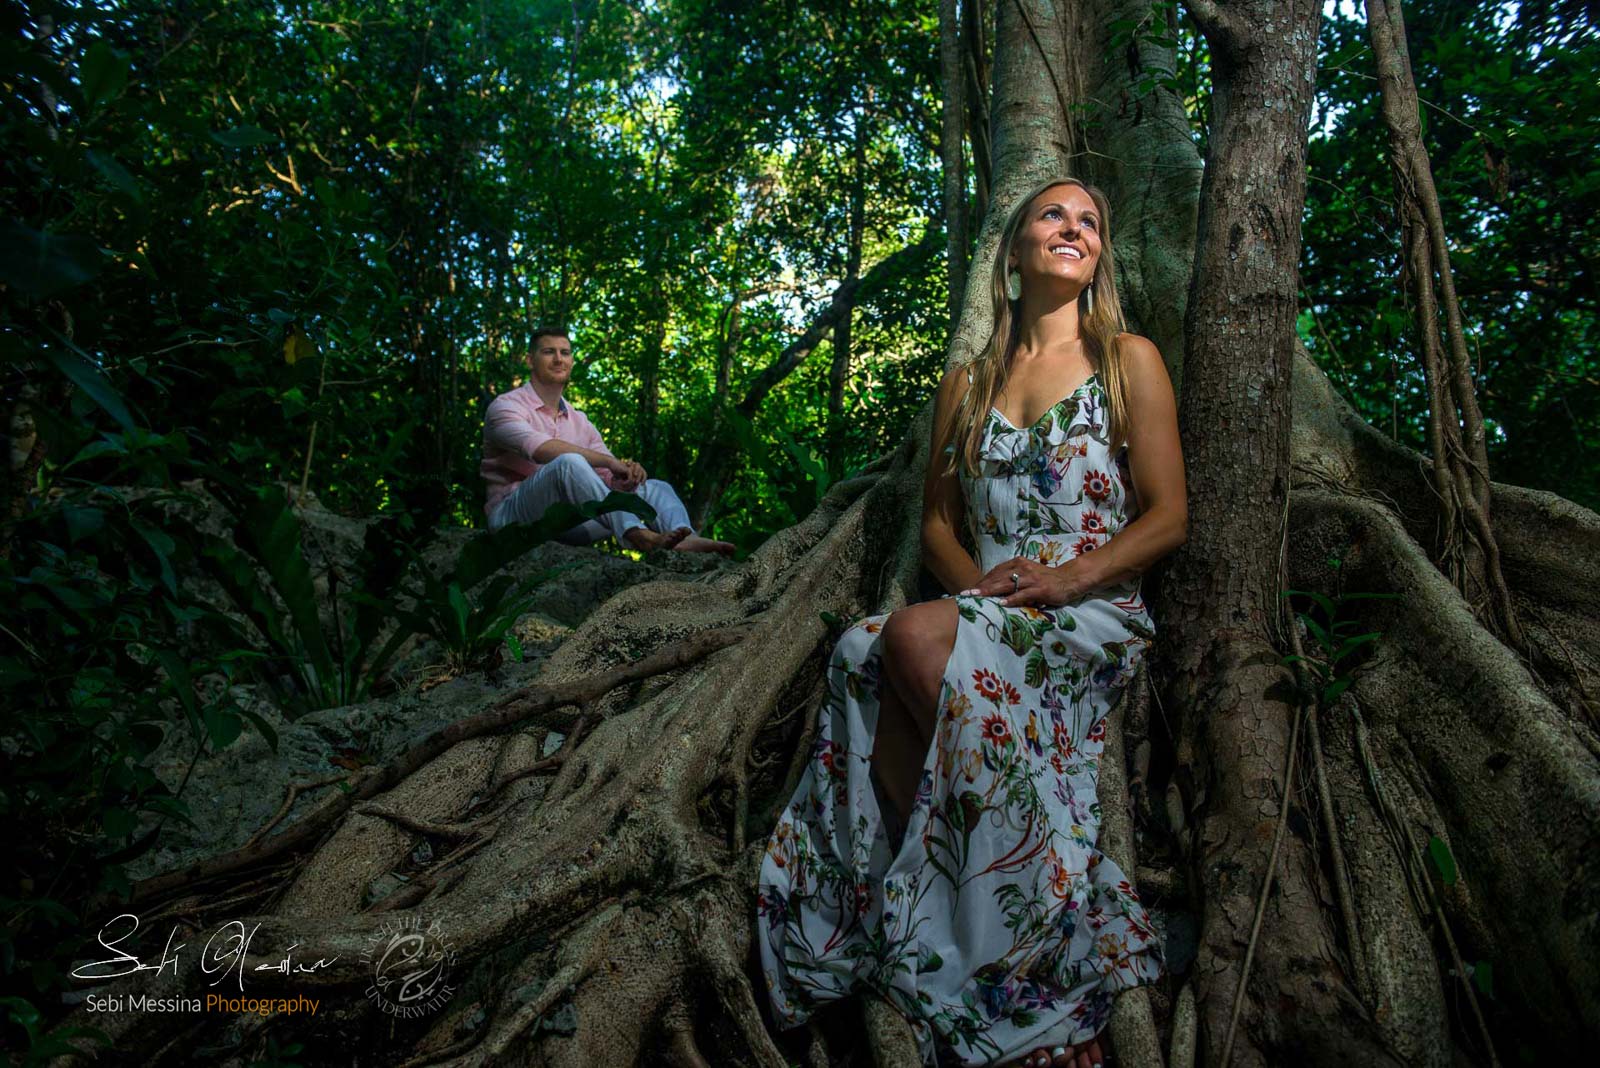 Engagement pictures in a cenote (Mexico) – Images on land